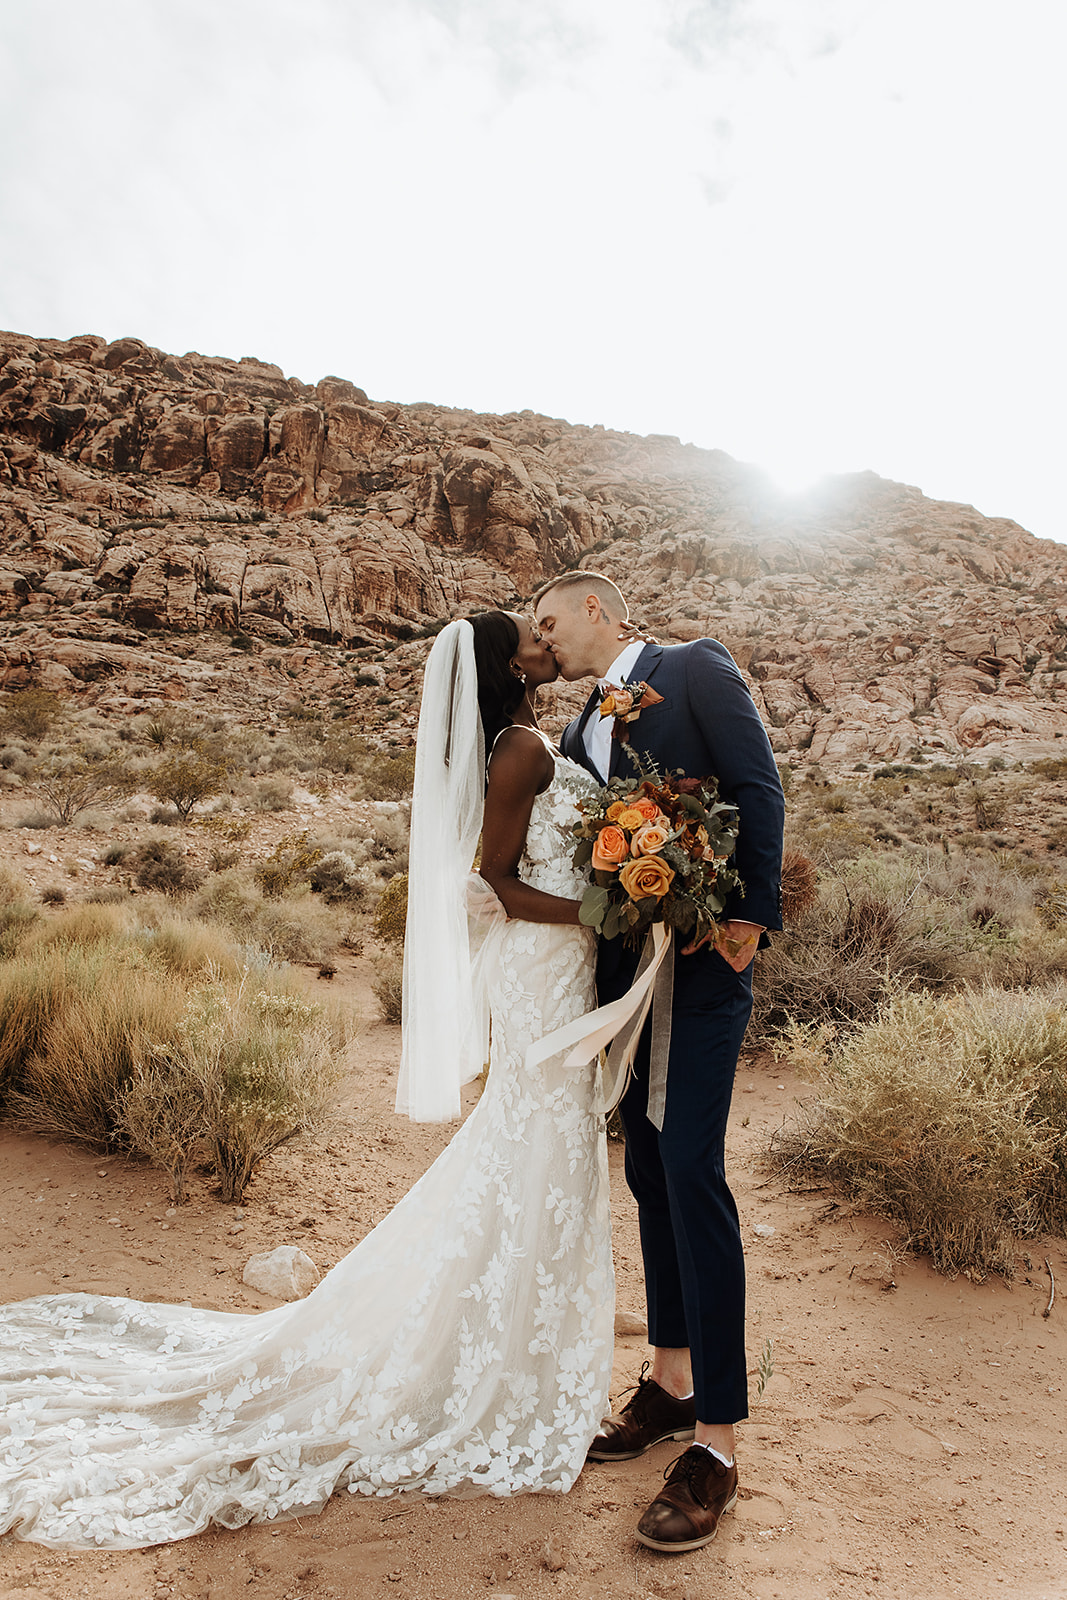 How To Plan The Perfect Red Rock Canyon Elopement (Las Vegas). Newlywed couple sharing a kiss during their elopement ceremony.